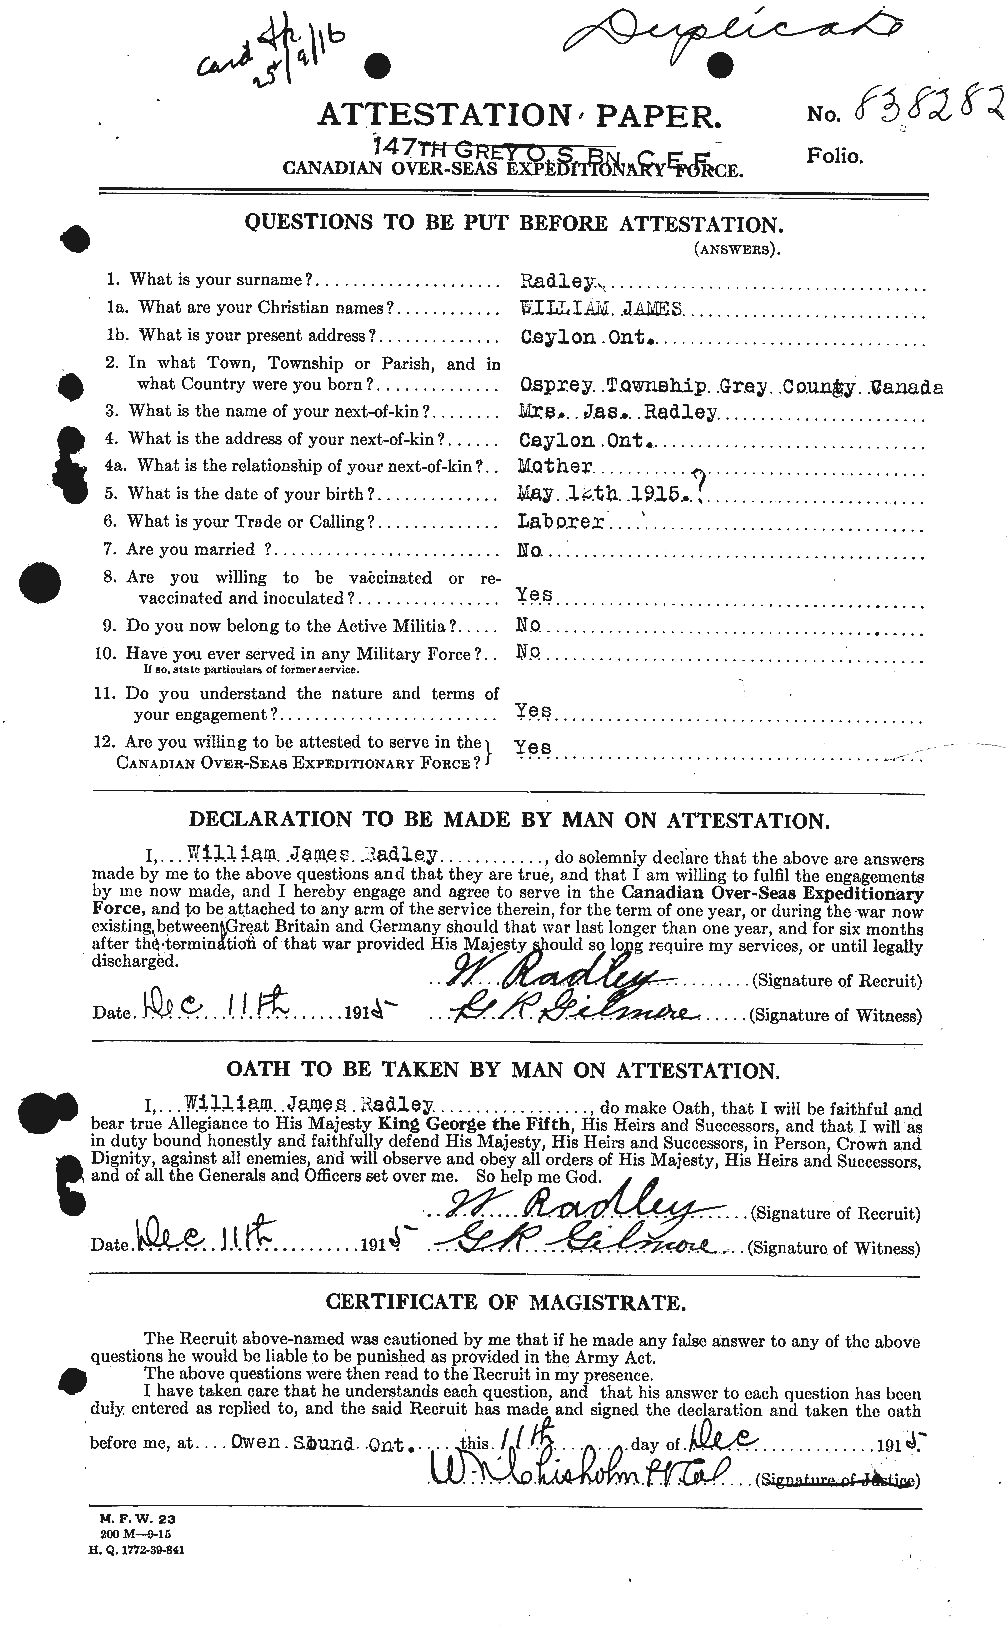 Personnel Records of the First World War - CEF 591126a